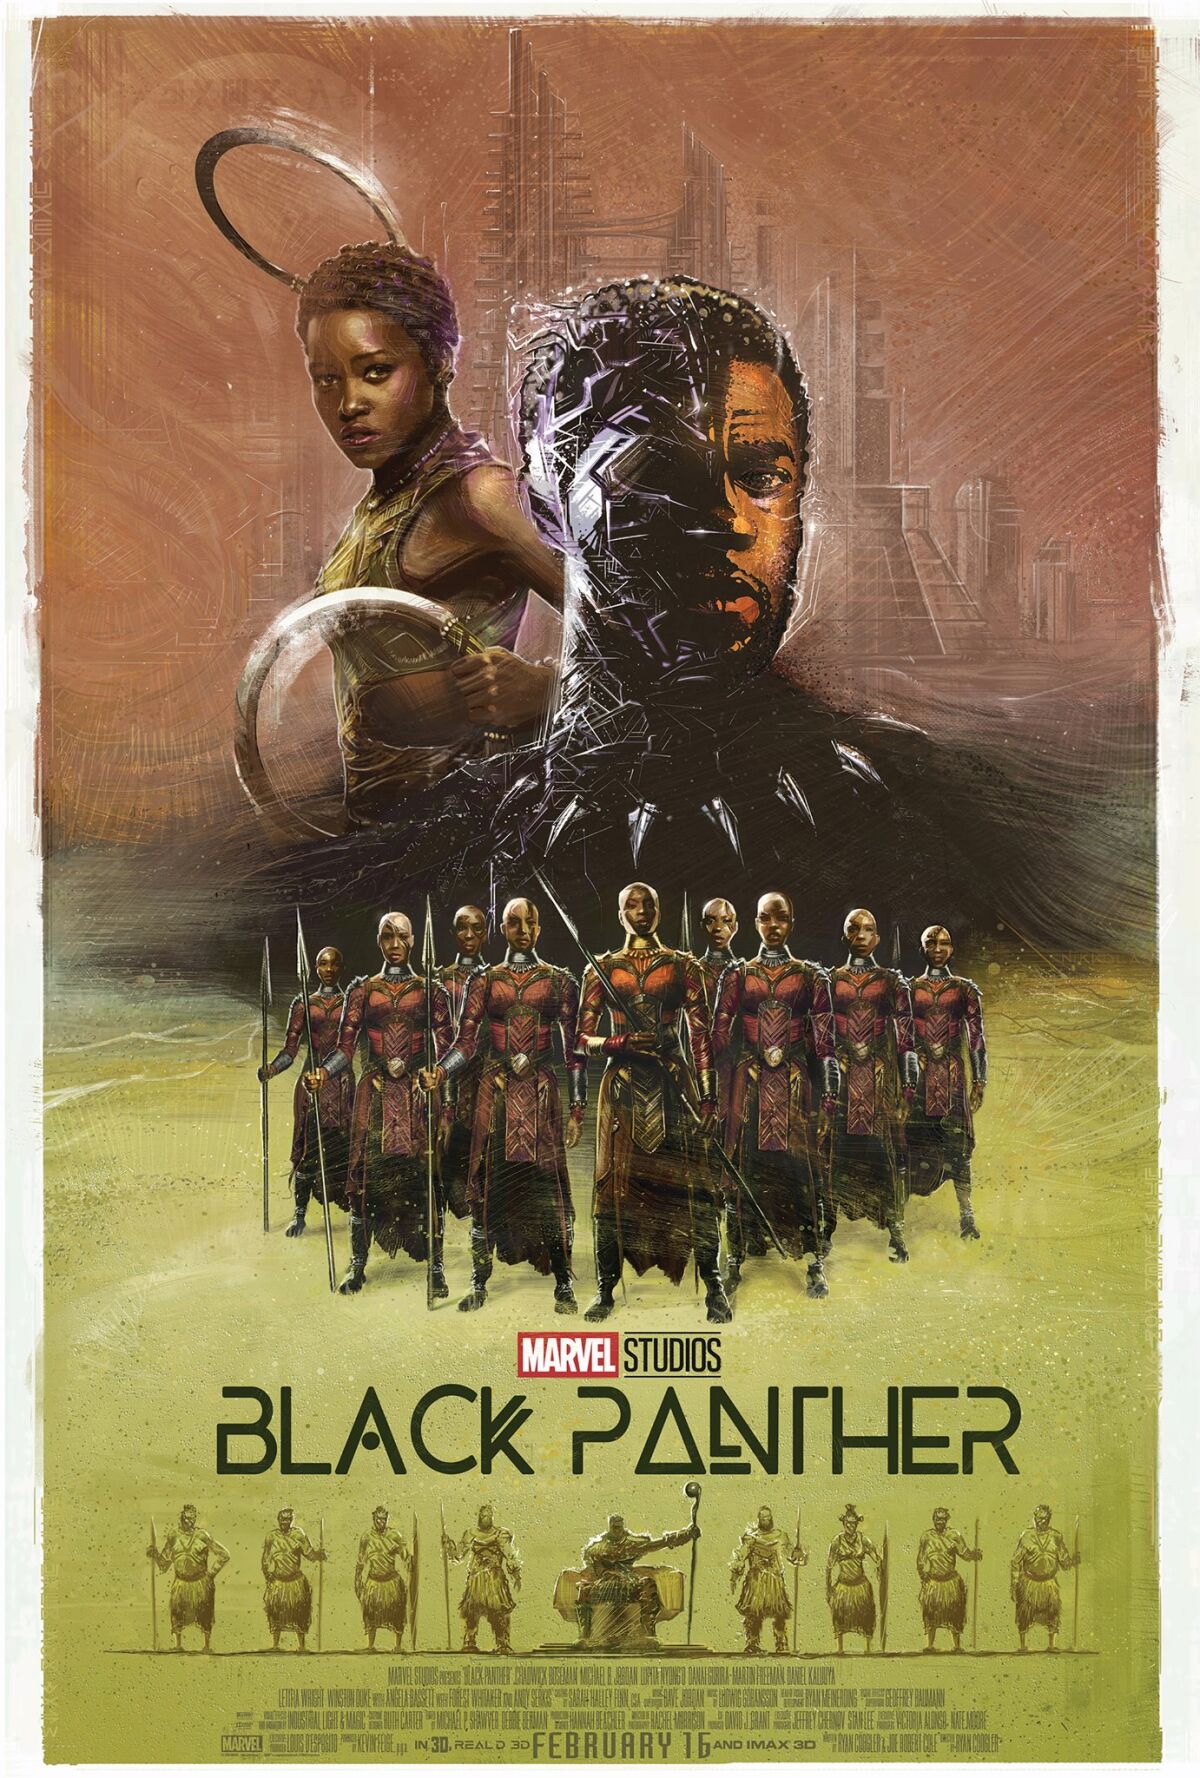 "Black Panther" cast and crew gift poster